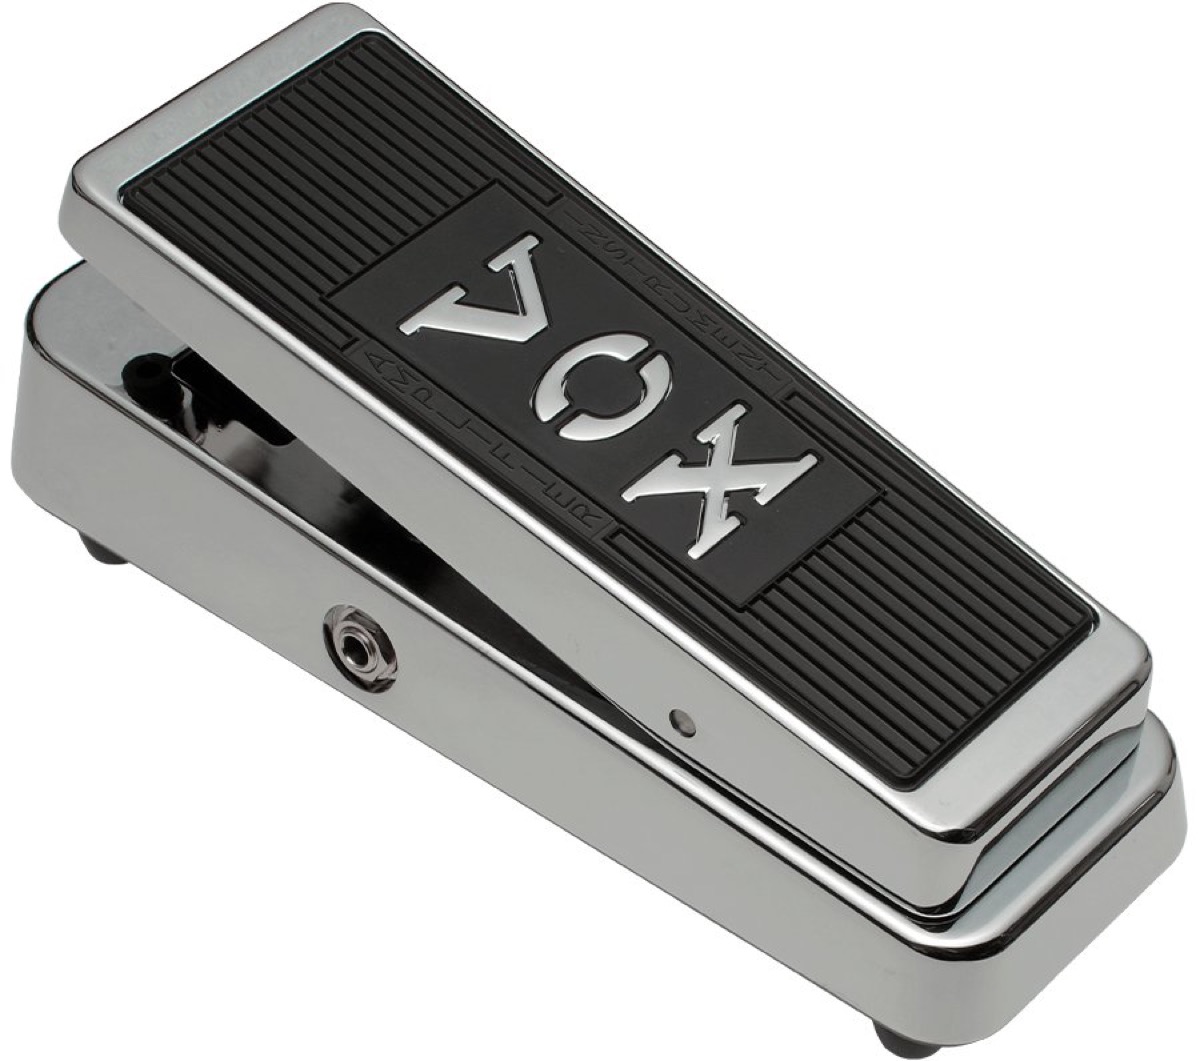 Vox The Real McCoy VRM-1 Limited Edition Wah Pedal